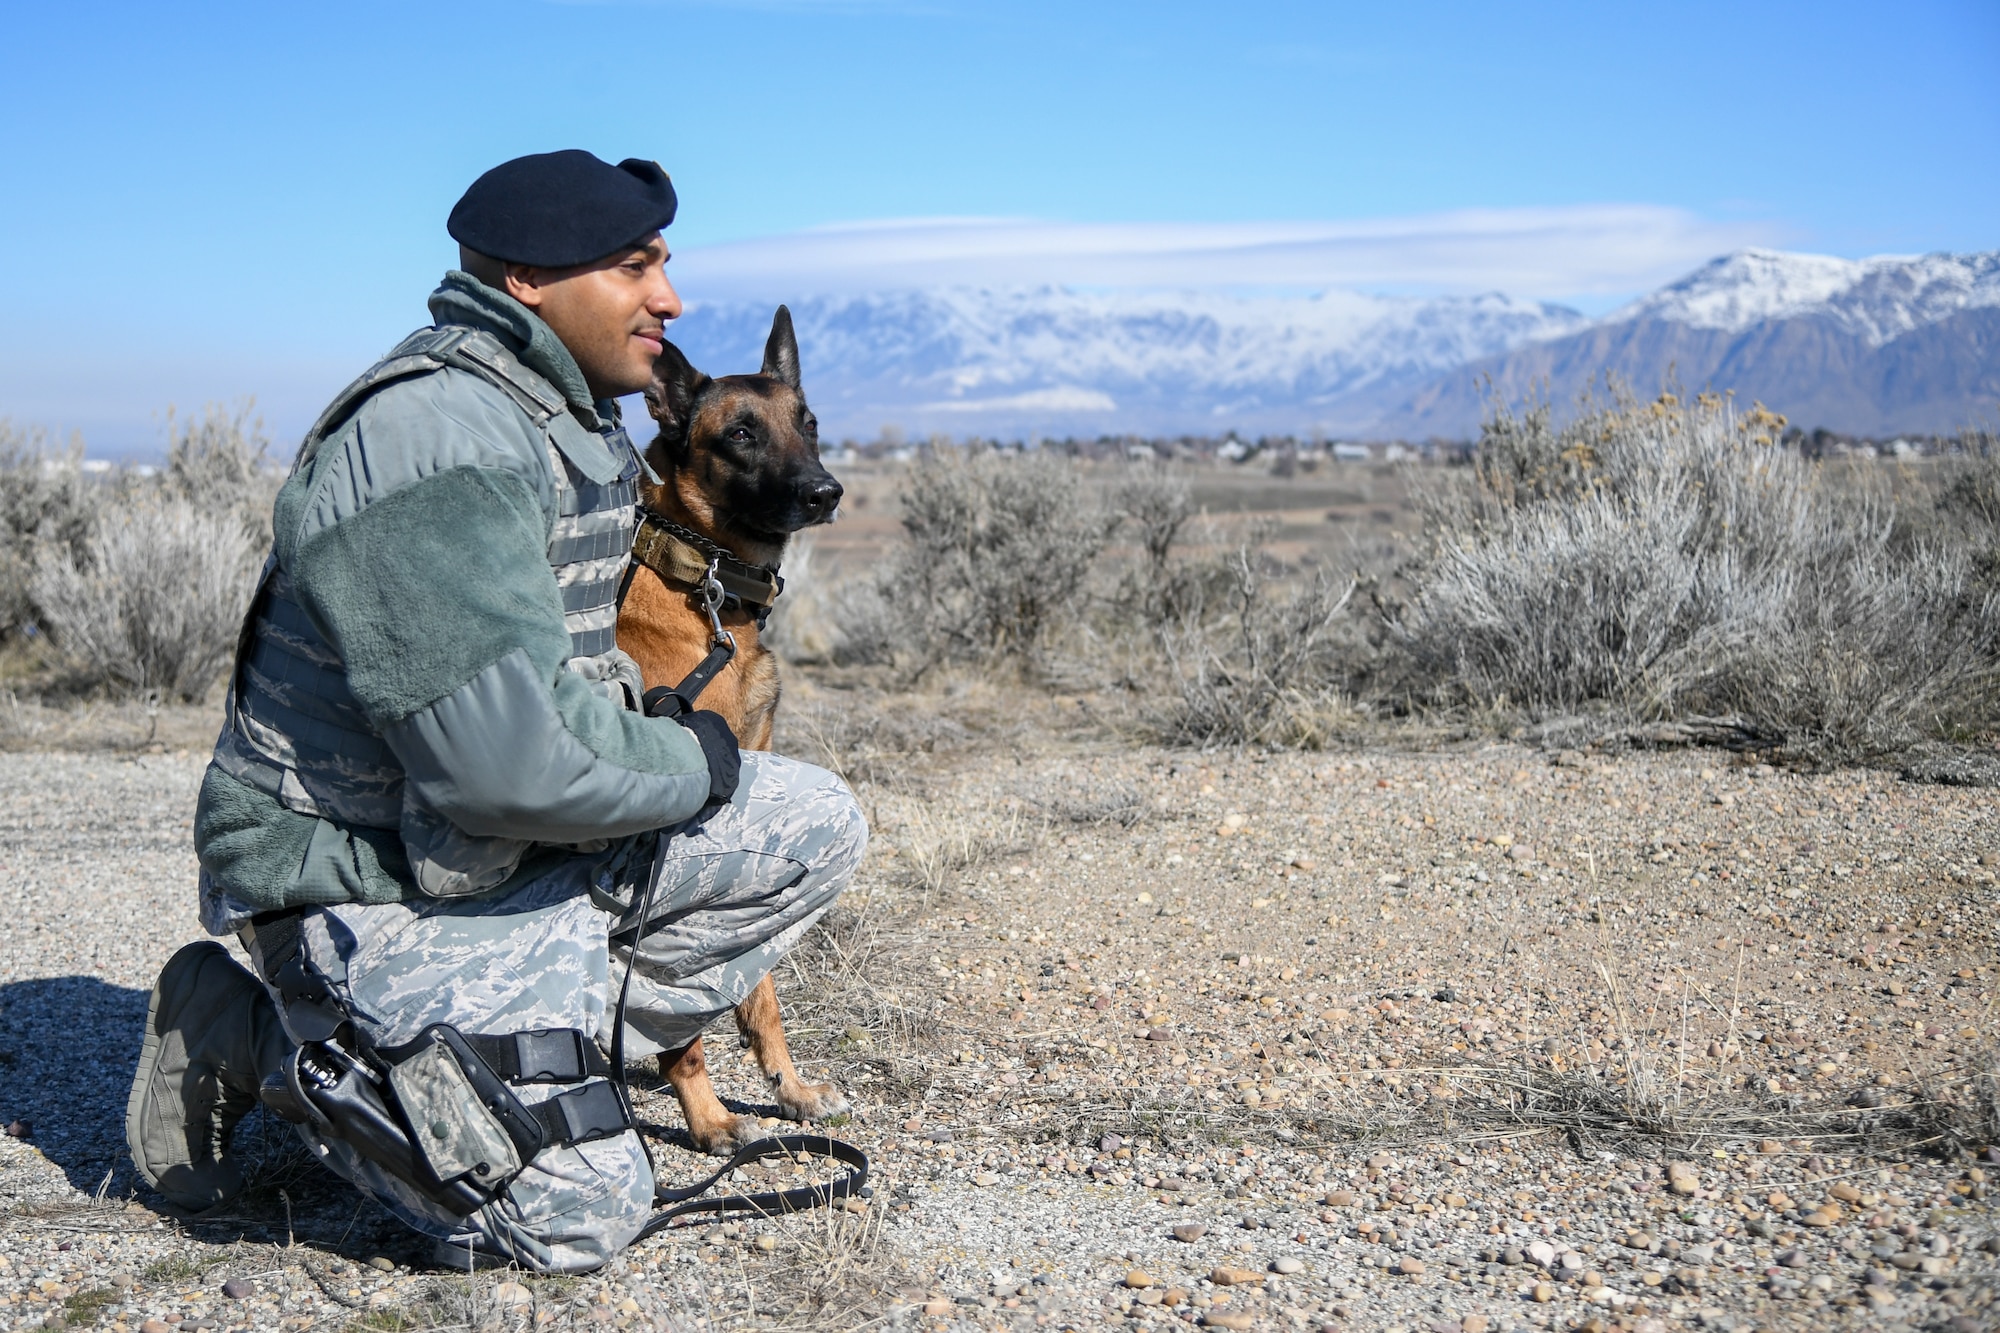 Staff Sgt. Paul Bryant, 75th Security Force Squadron, sits with Xxuthus, a military working dog, at Hill Air Force Base, Utah, March 4, 2020. Bryant has been XXuthus's handler for six months. Xxuthus is a single-purpose MWD, trained as an explosive detection dog. (U.S. Air Force photo by Cynthia Griggs)